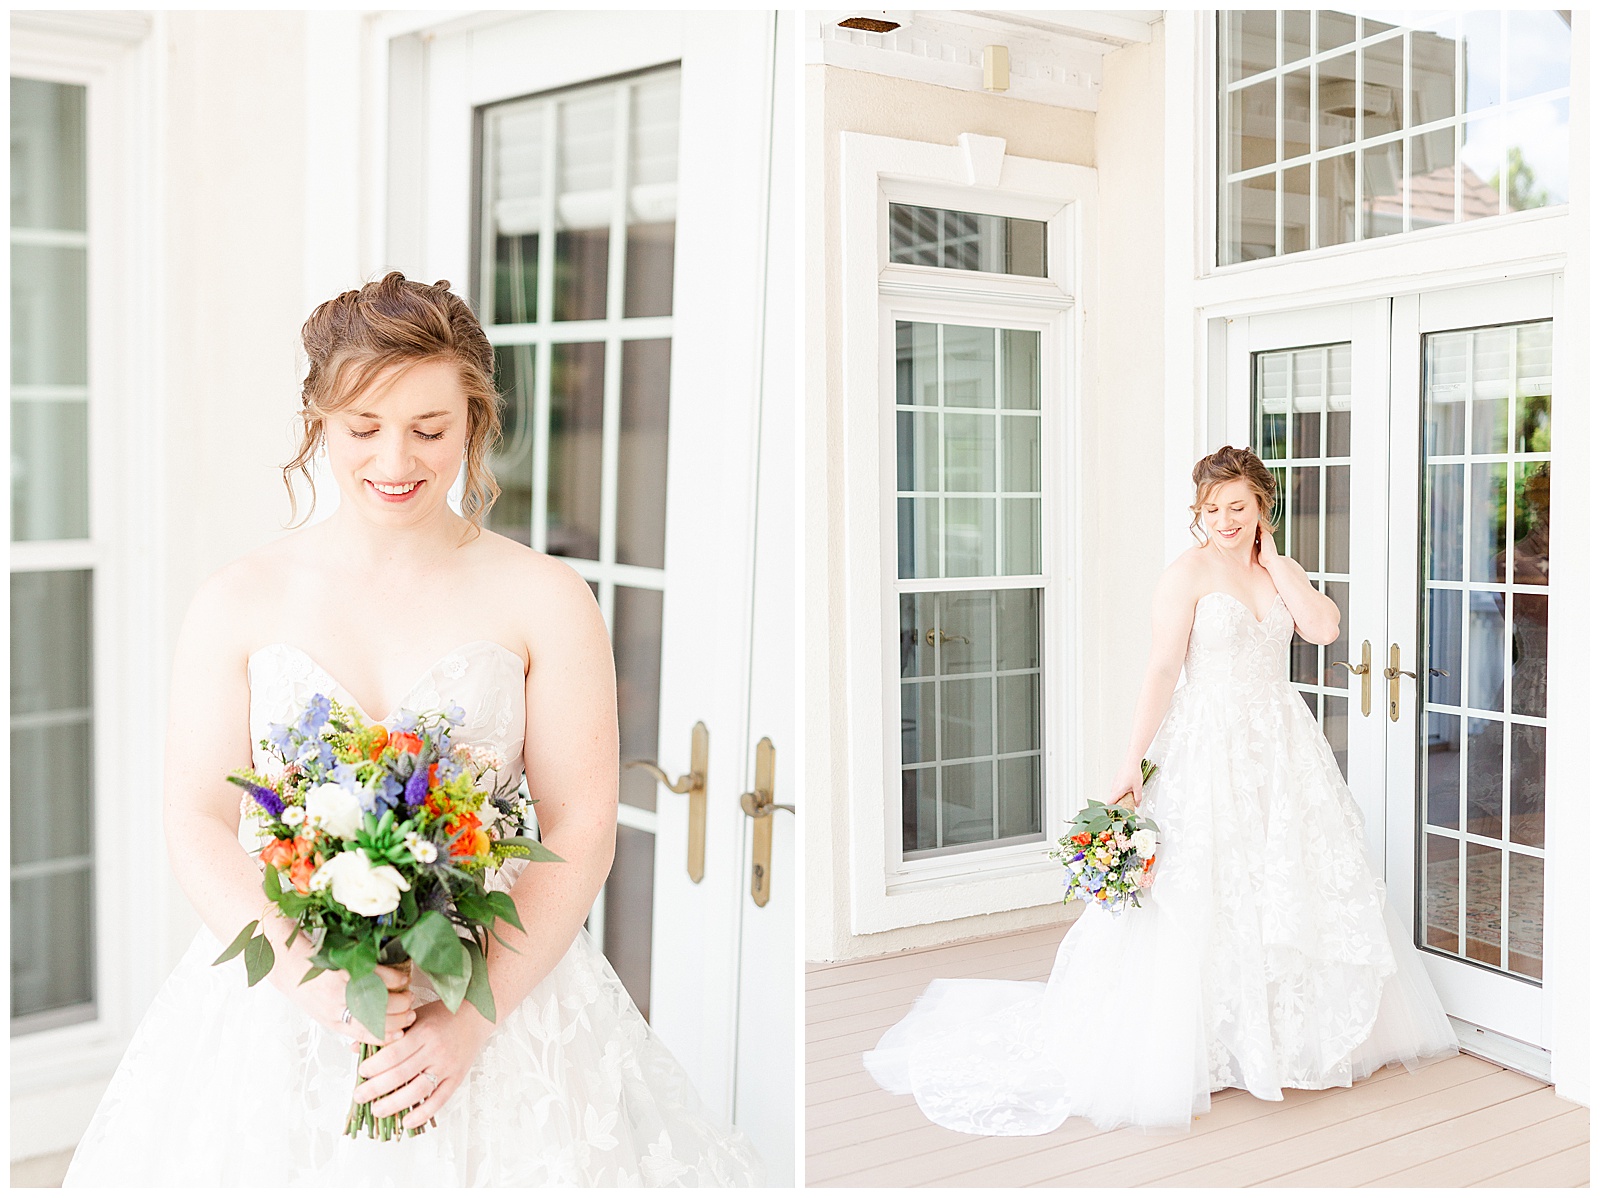 white house mansion location 👰 Bride: lace wedding dress + veil 💐 Colorful orange and blue bouquet 📸 Outdoorsy Lake and Mountain Bridal Session with Julia | Kevyn Dixon Photography